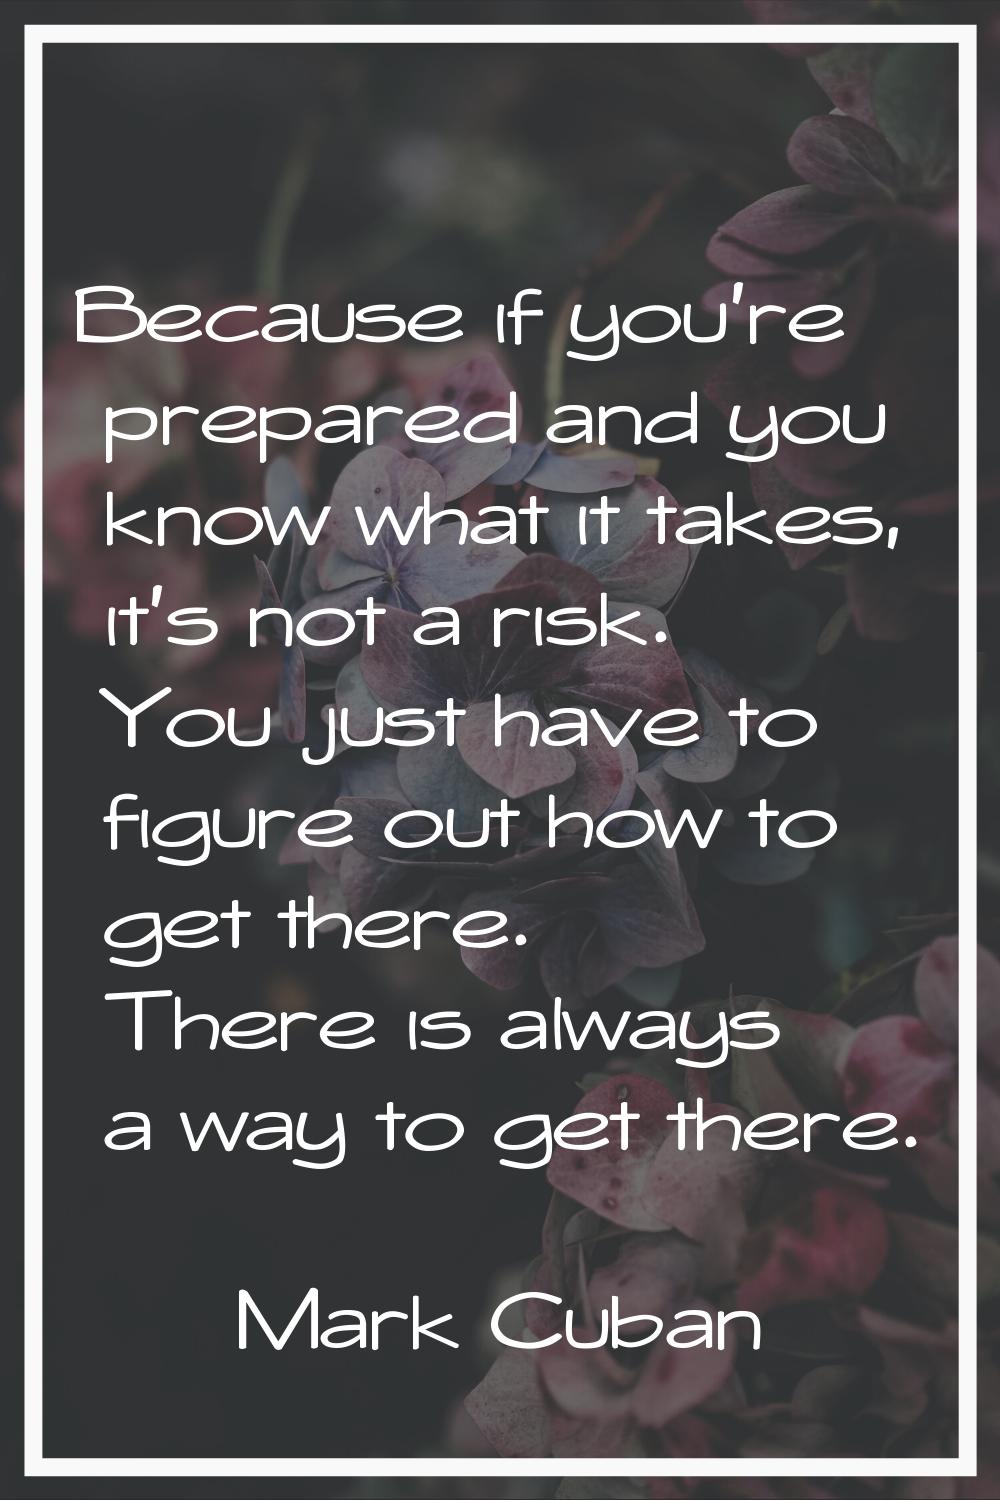 Because if you're prepared and you know what it takes, it's not a risk. You just have to figure out